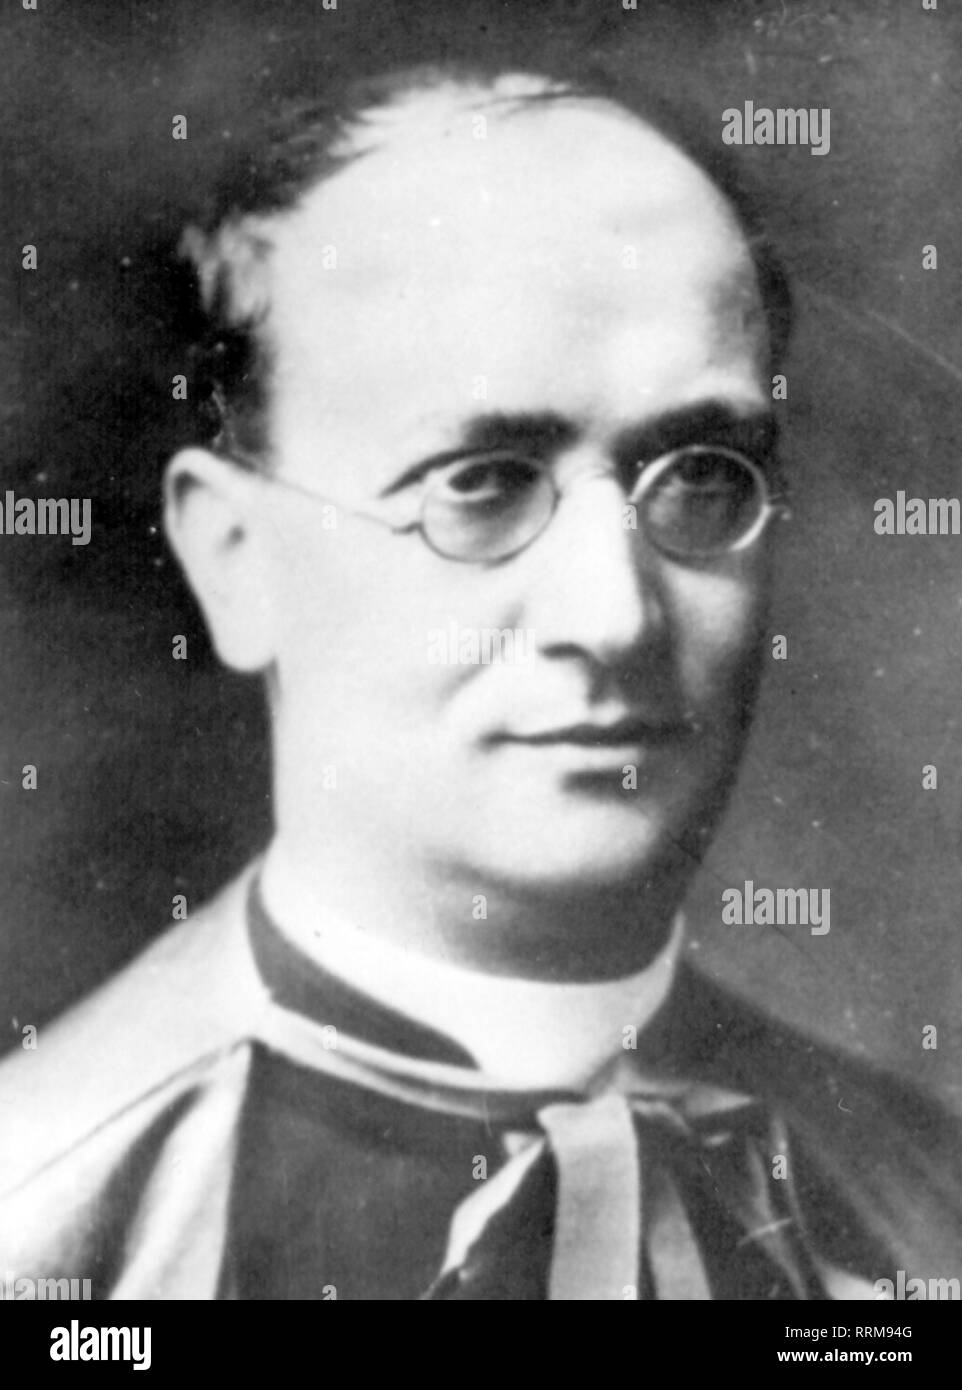 Ottaviani, Alfredo. 29.10.1890 - 3.8.1979, Italian clergyman, chamberlain of the Sacred College of Cardinals 1954 - 1958, portrait, 1958, Additional-Rights-Clearance-Info-Not-Available Stock Photo